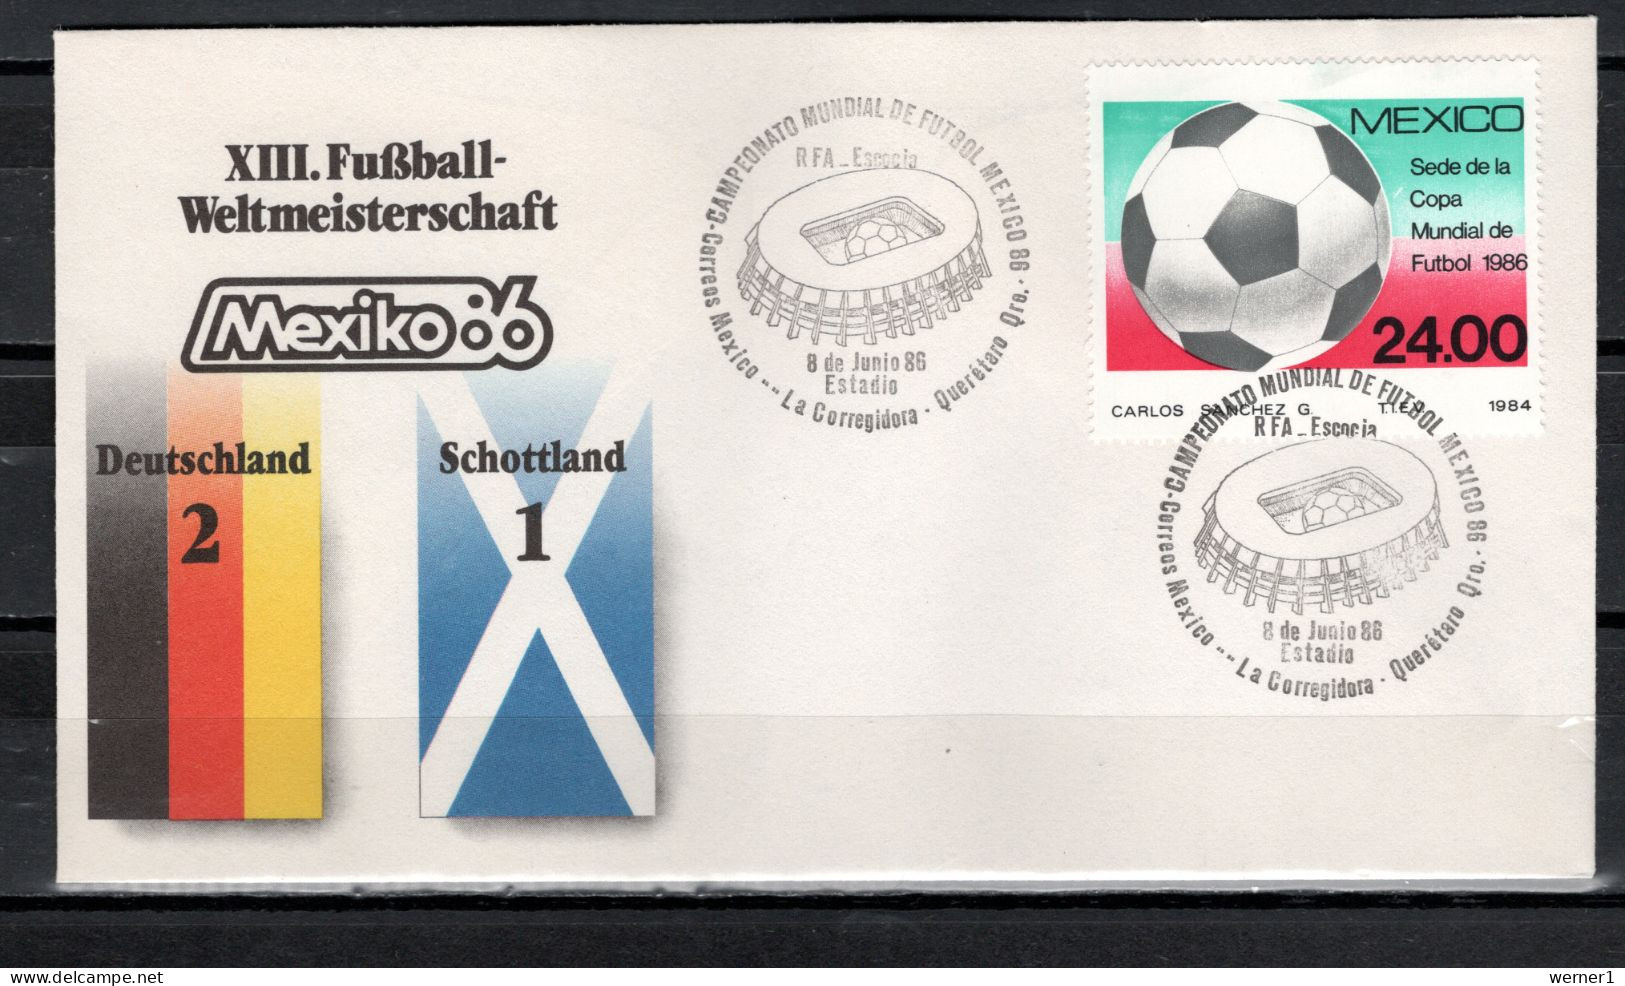 Mexico 1986 Football Soccer World Cup Commemorative Cover Match Germany - Scotland 2 : 1 - 1986 – Mexique